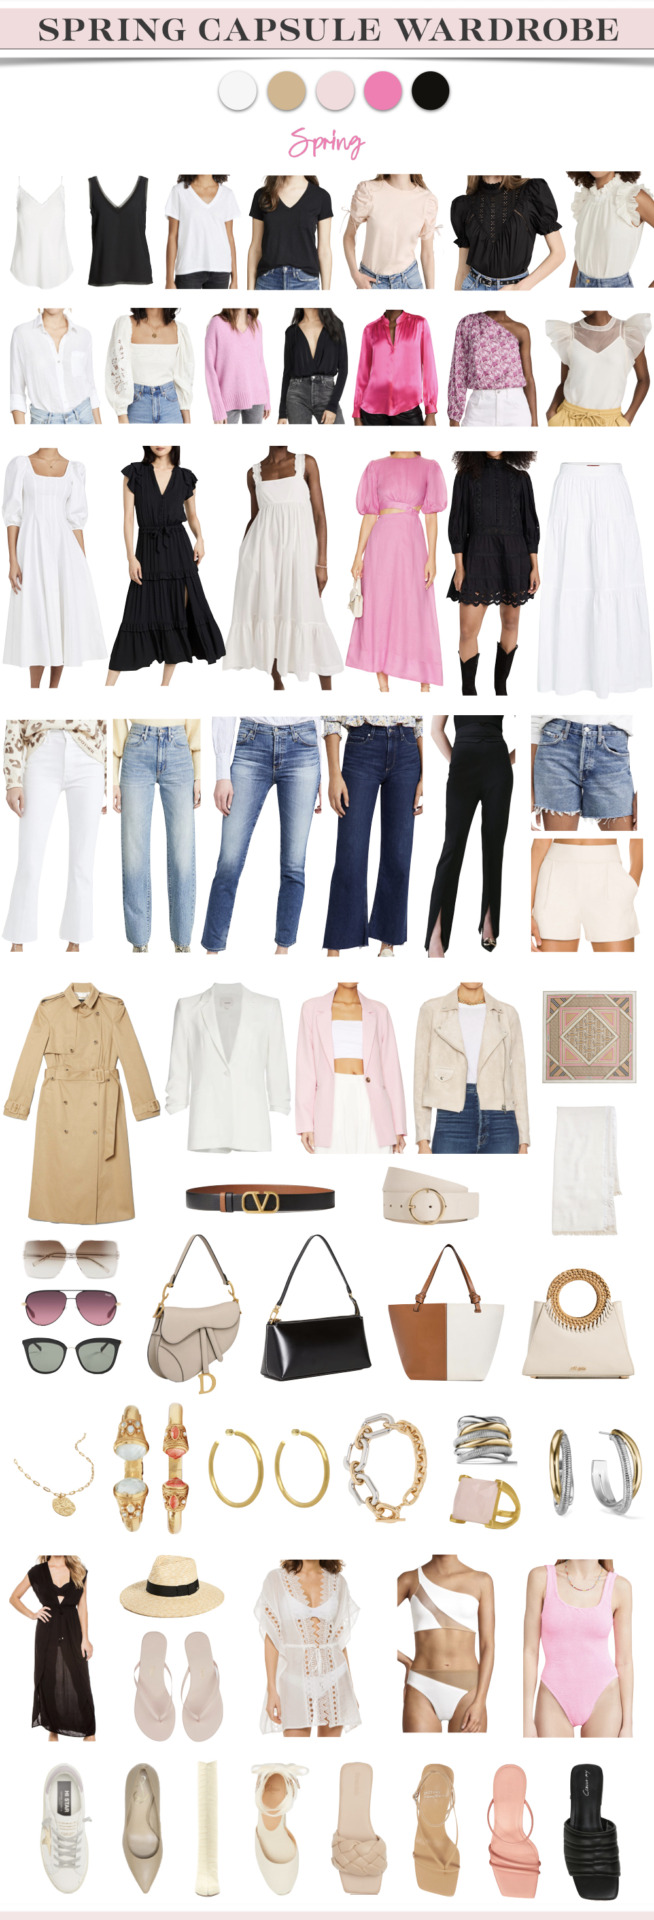 spring capsule wardrobe, spring capsule wardrobe 2023, spring wardrobe essentials, how to build a spring capsule wardrobe, winter to spring capsule wardrobe, spring capsule wardrobe checklist, spring capsule wardrobe outfits